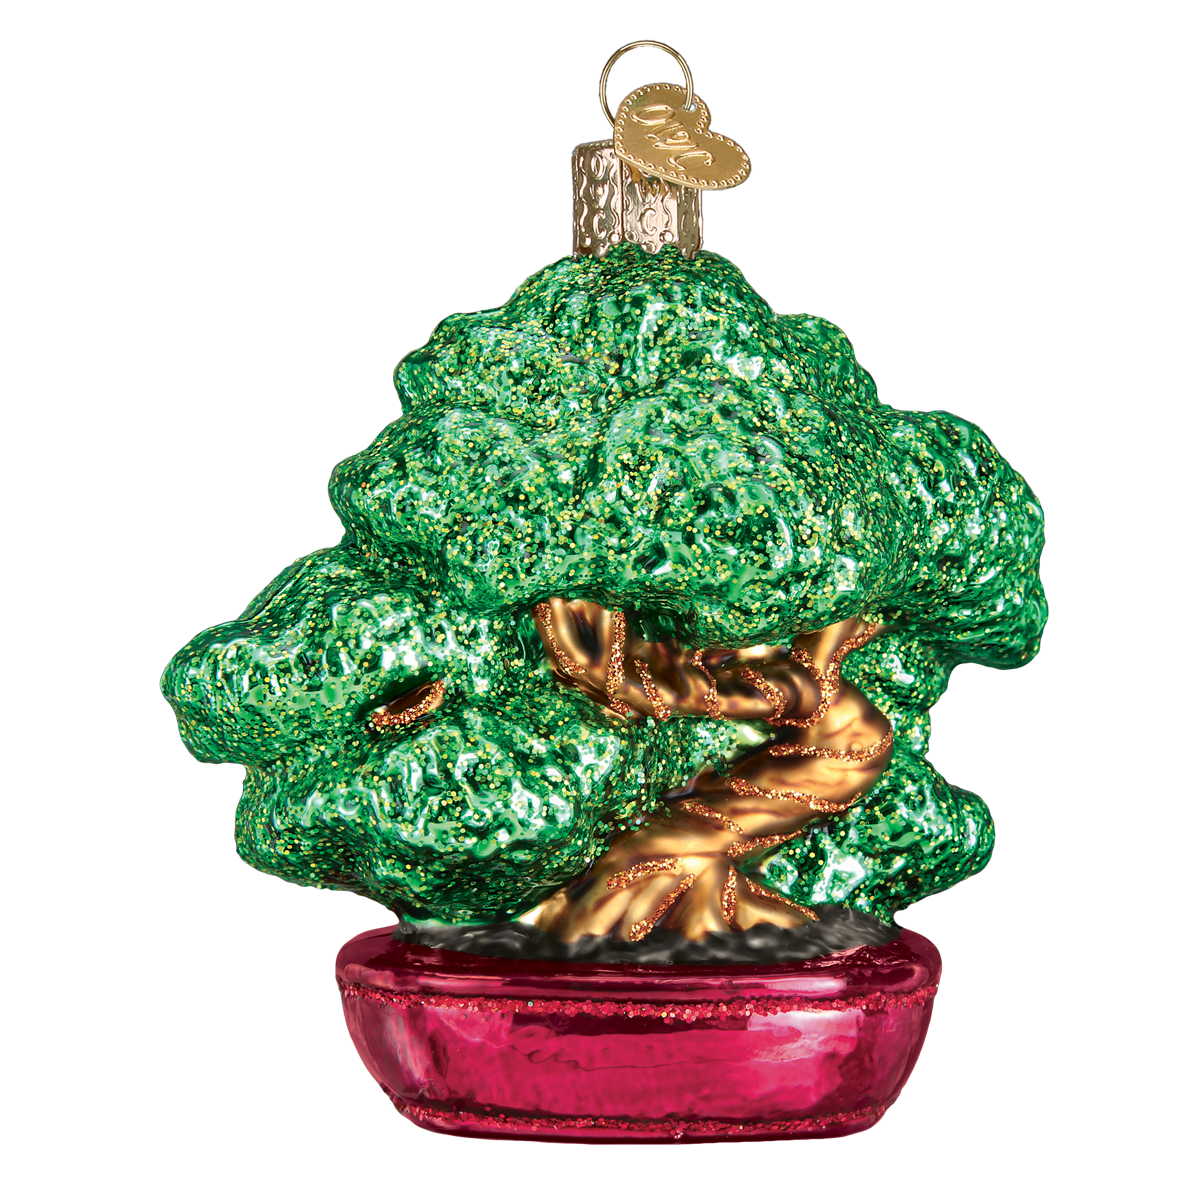  Bonsai Tree Ornaments of the decade Check it out now 